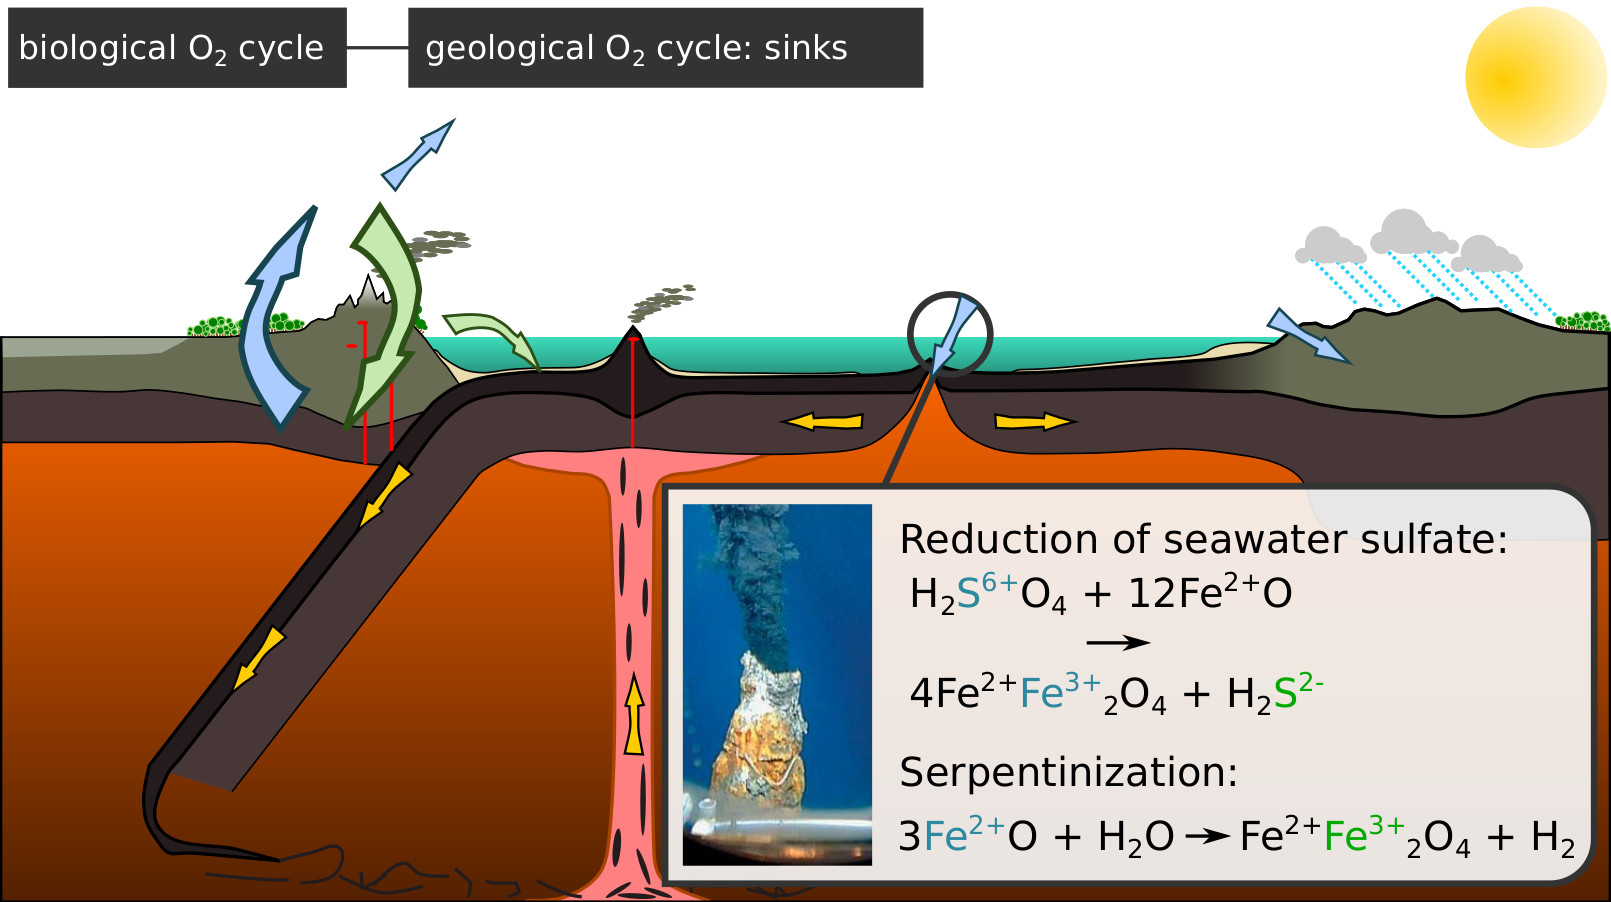 Oxygen cycling between the solid Earth and oceans and atmosphere. Black smoker image credit: Meg Tivey, WHOI